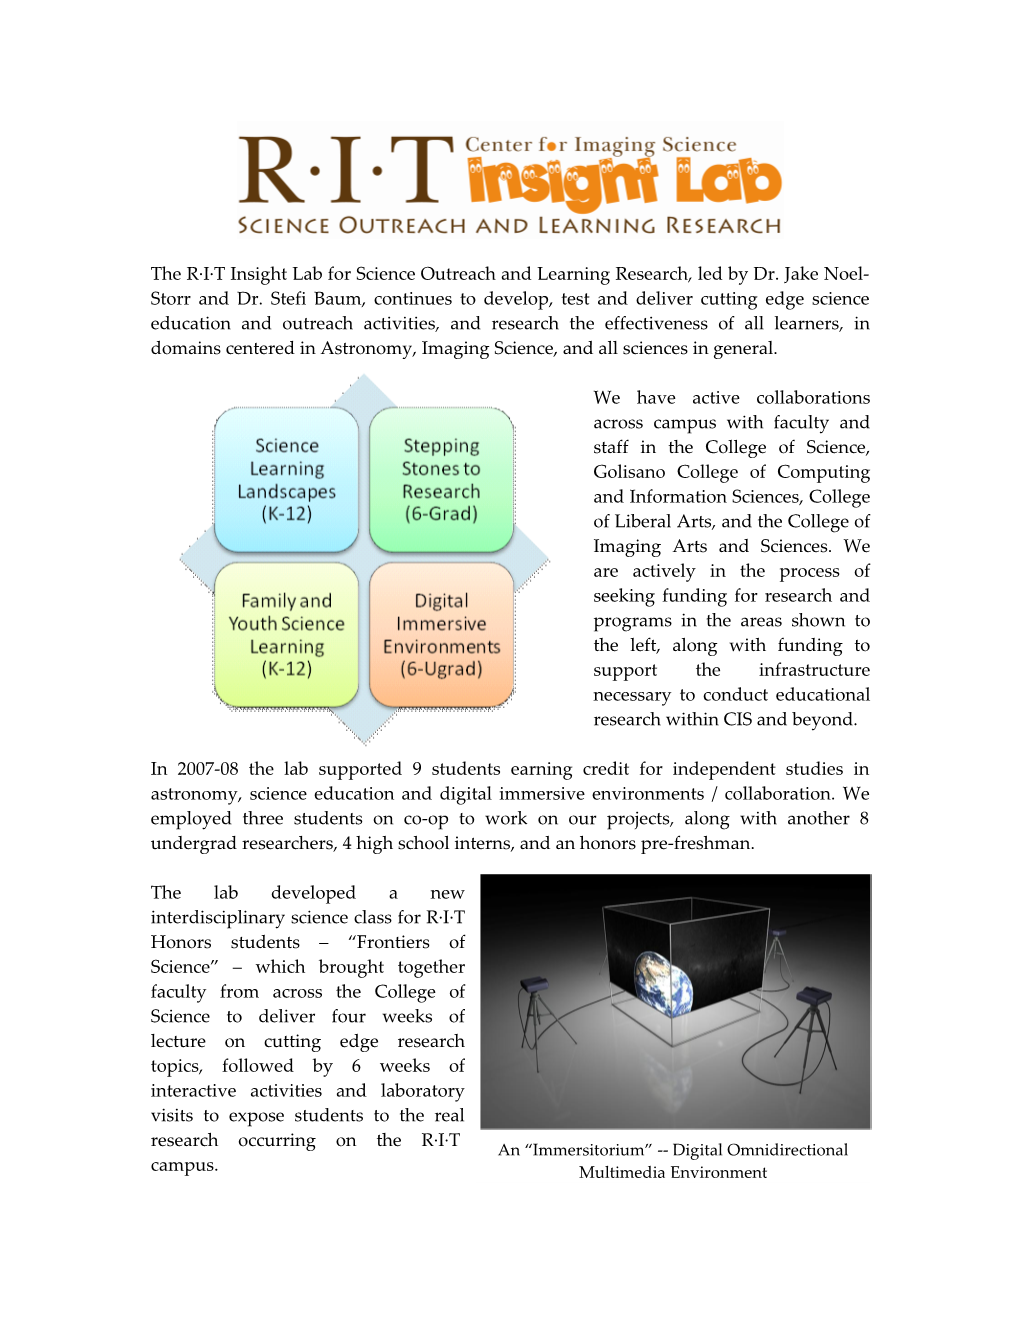 The R I T Insight Lab for Science Outreach and Learning Research, Led by Dr. Jake Noel-Storr